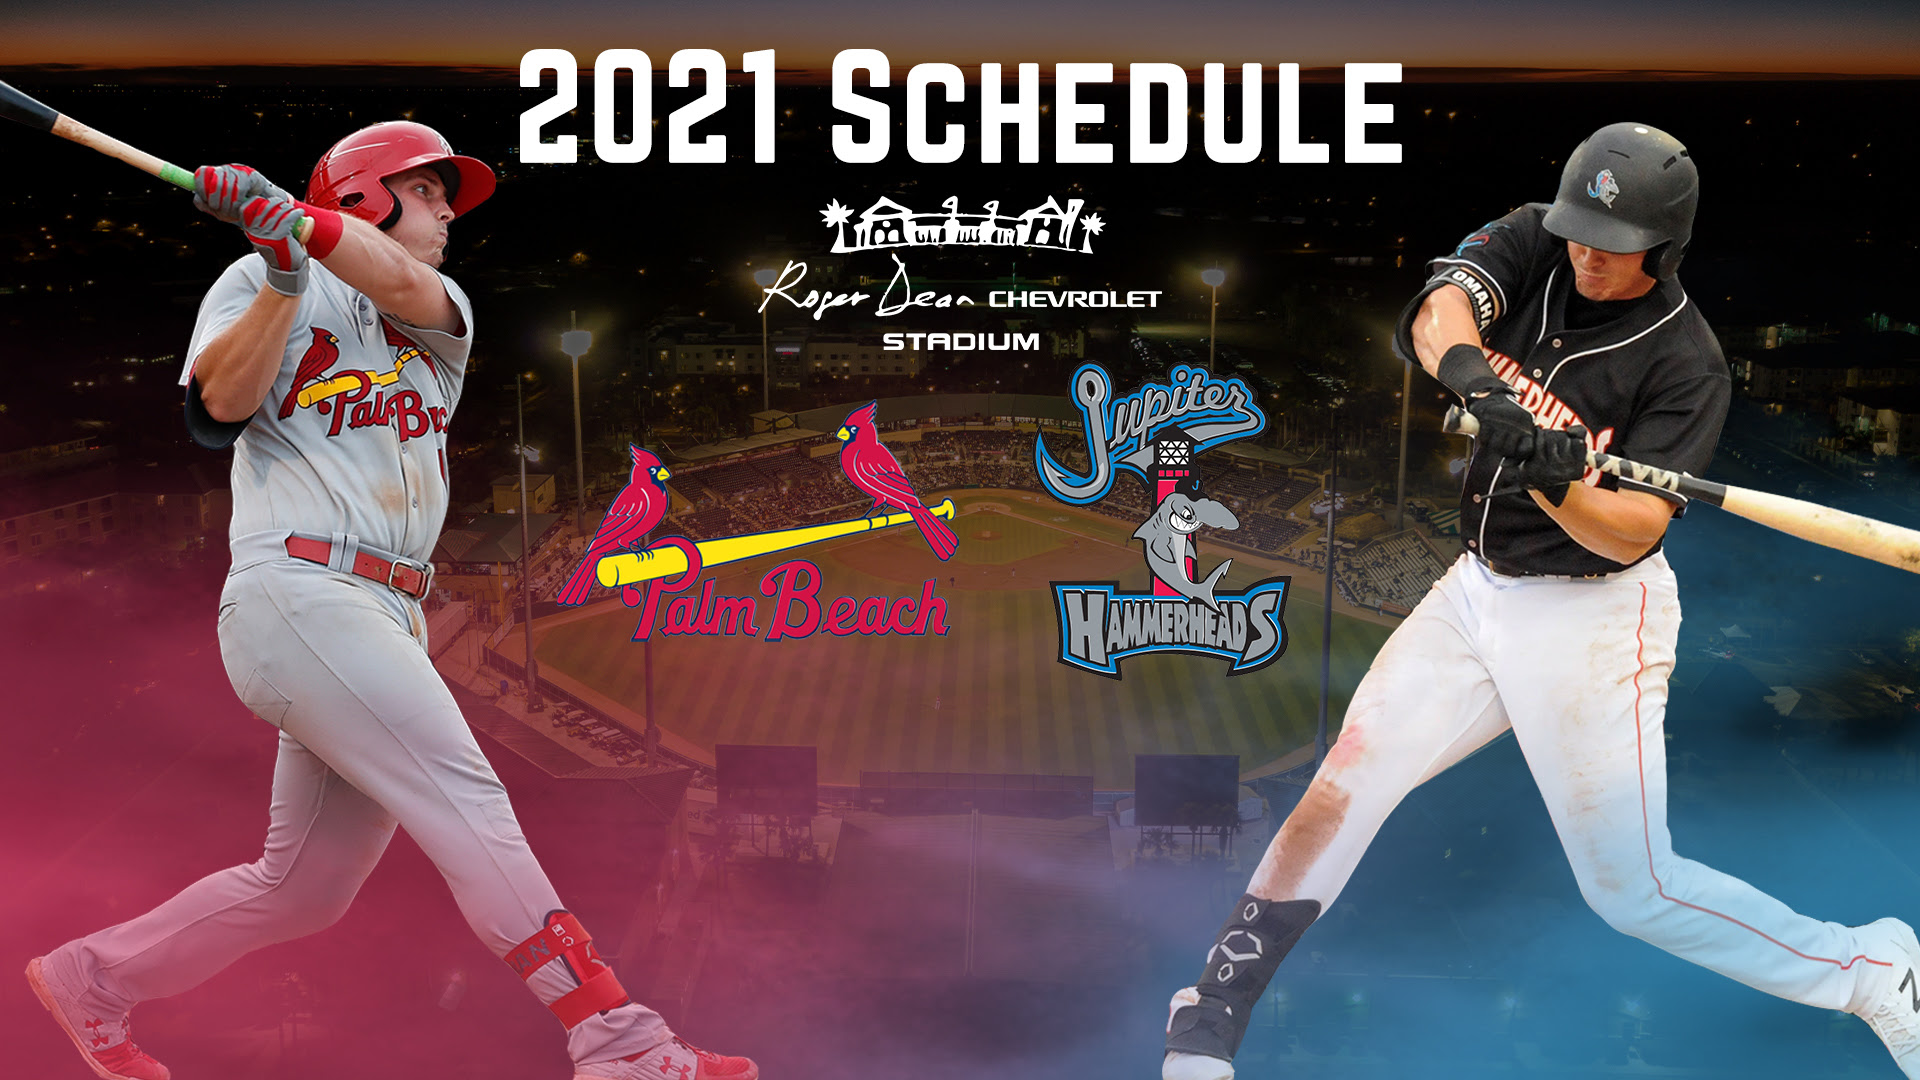 2021 Minor League Schedule released & Spring Training Tickets - South Florida Tribune